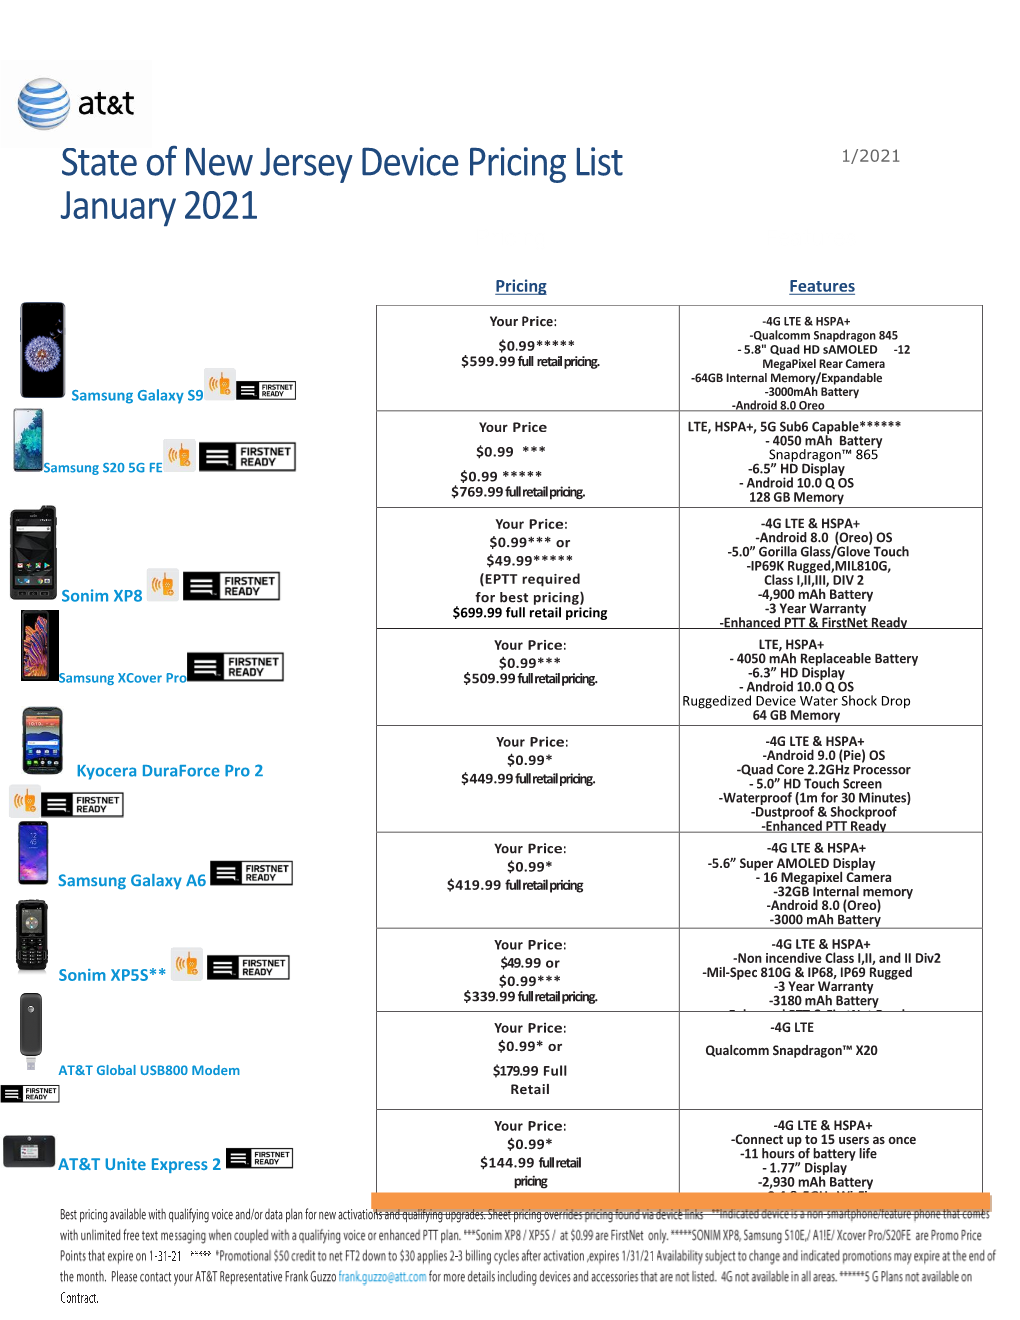 State of New Jersey Device Pricing List January 2021